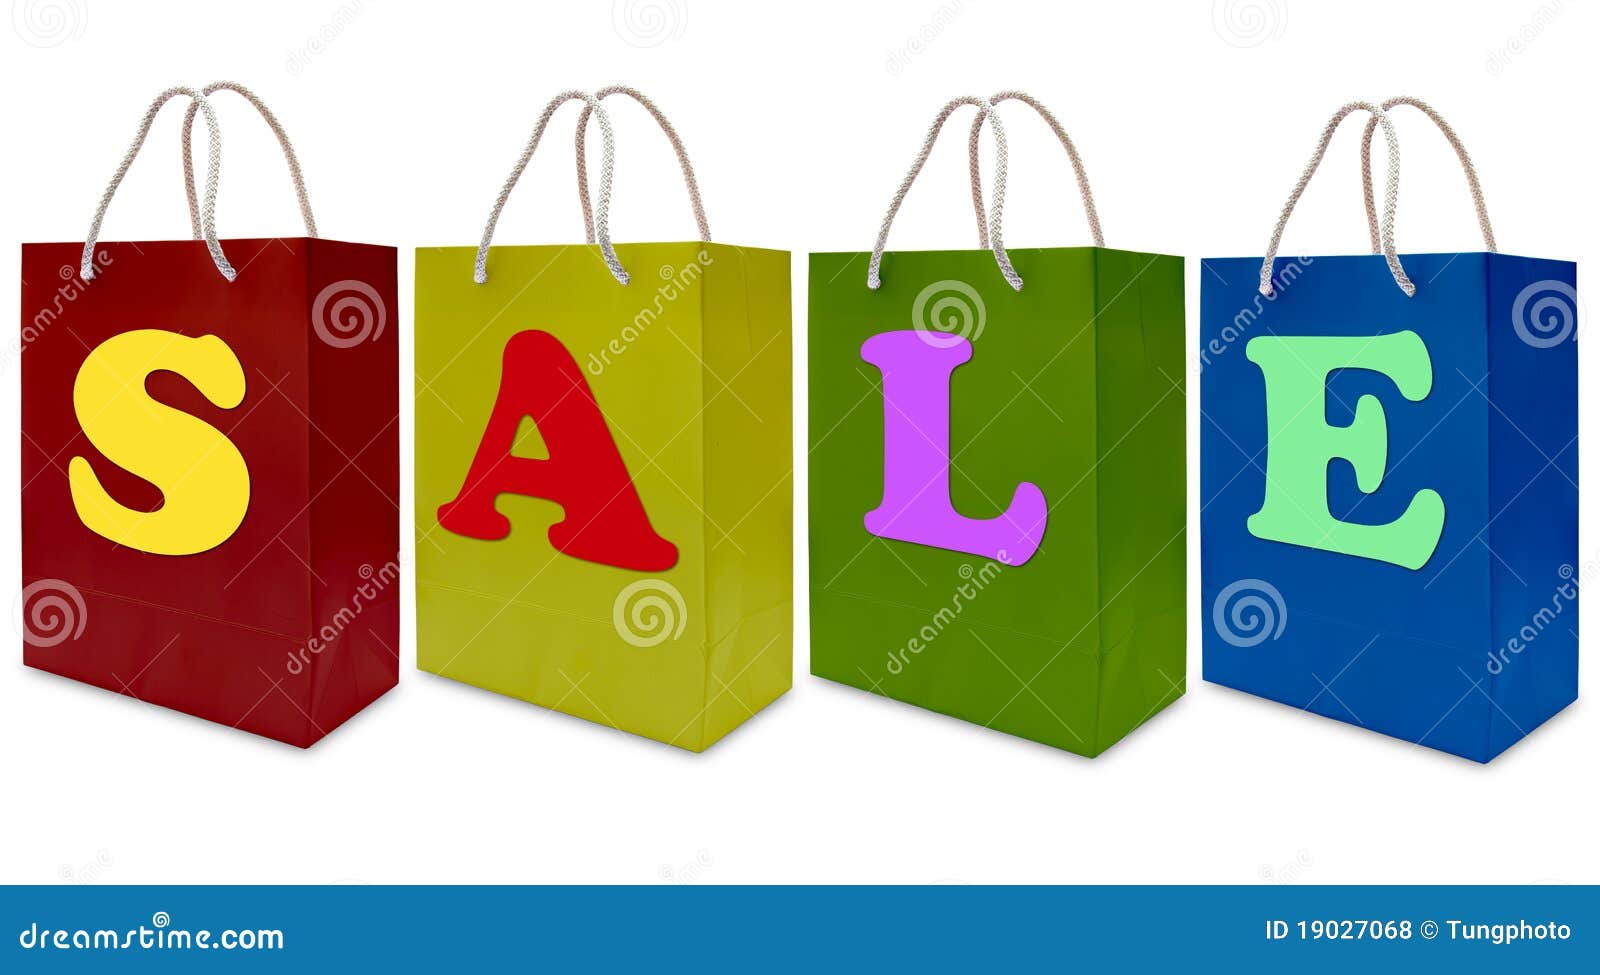 Sale Label on Shopping Paper Bag Stock Photo - Image of banner, deal ...